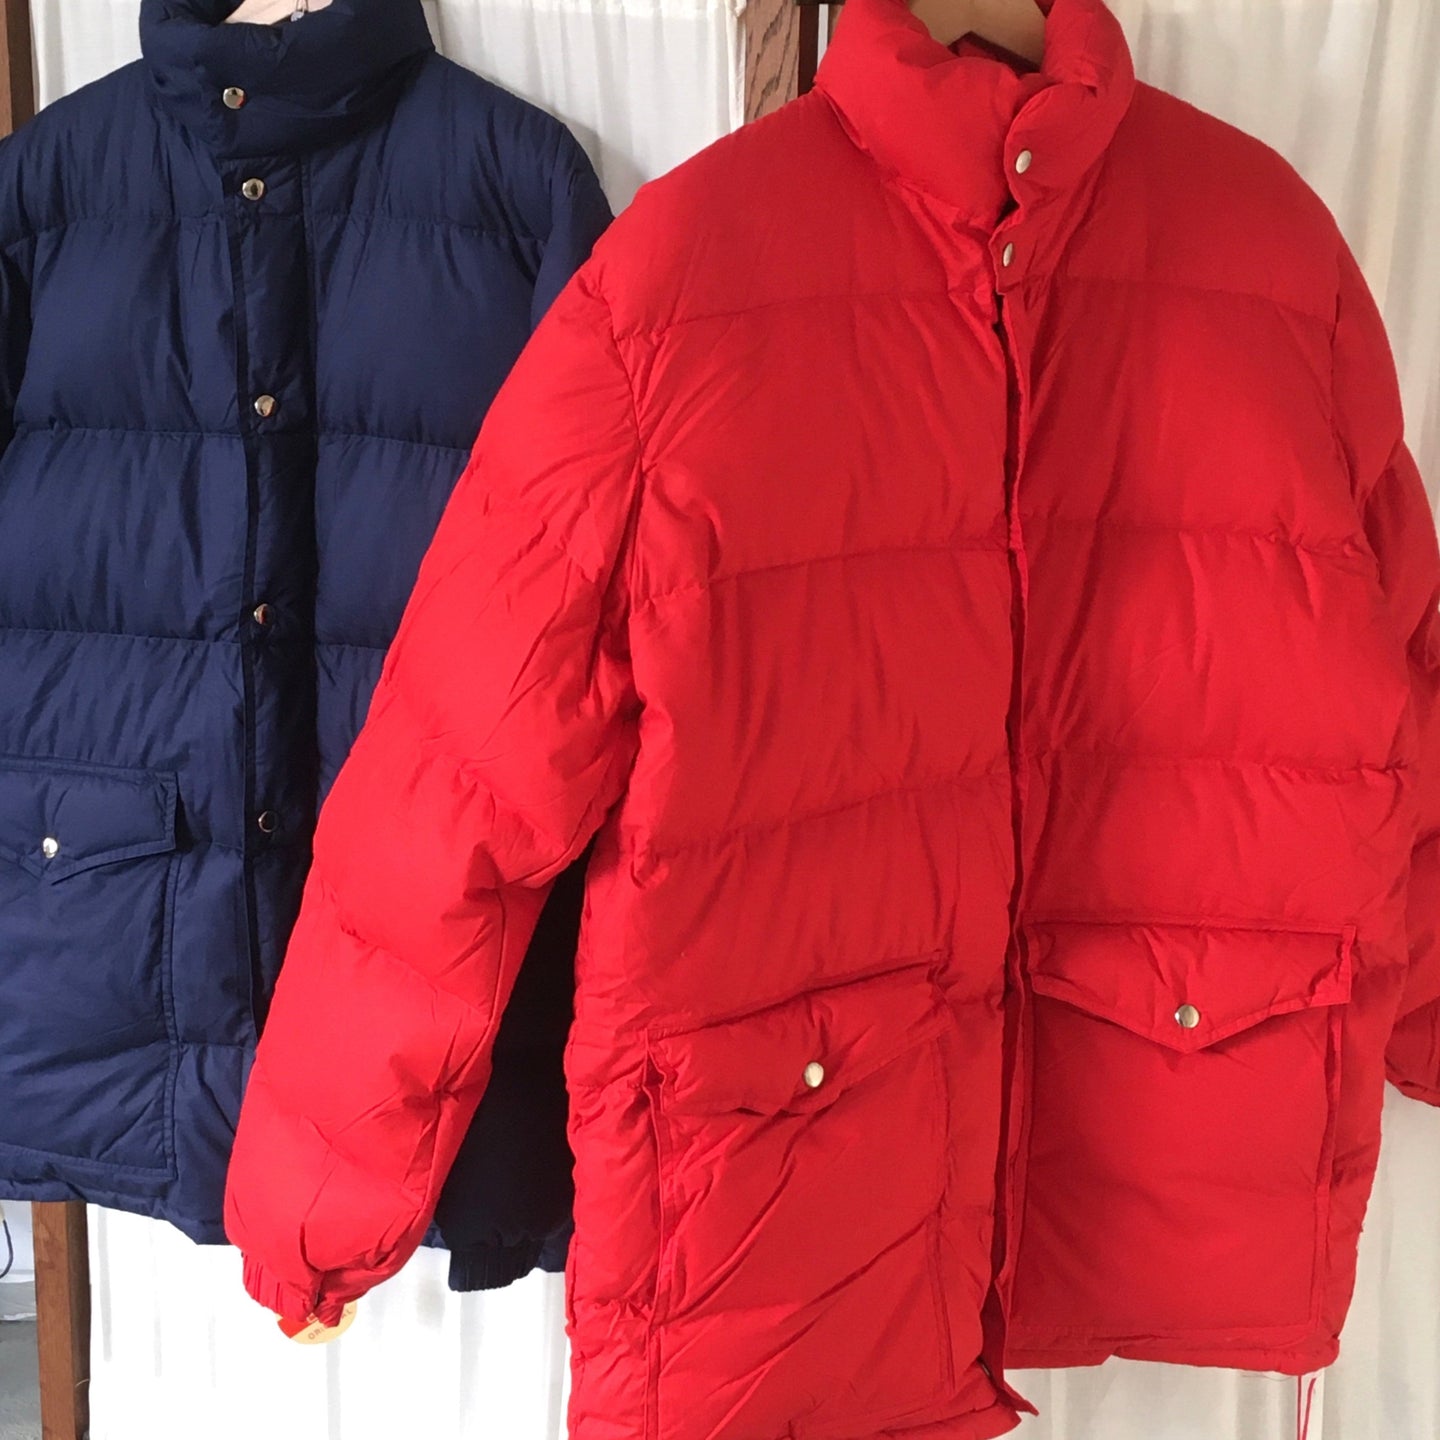 Red puffer jacket, size XL